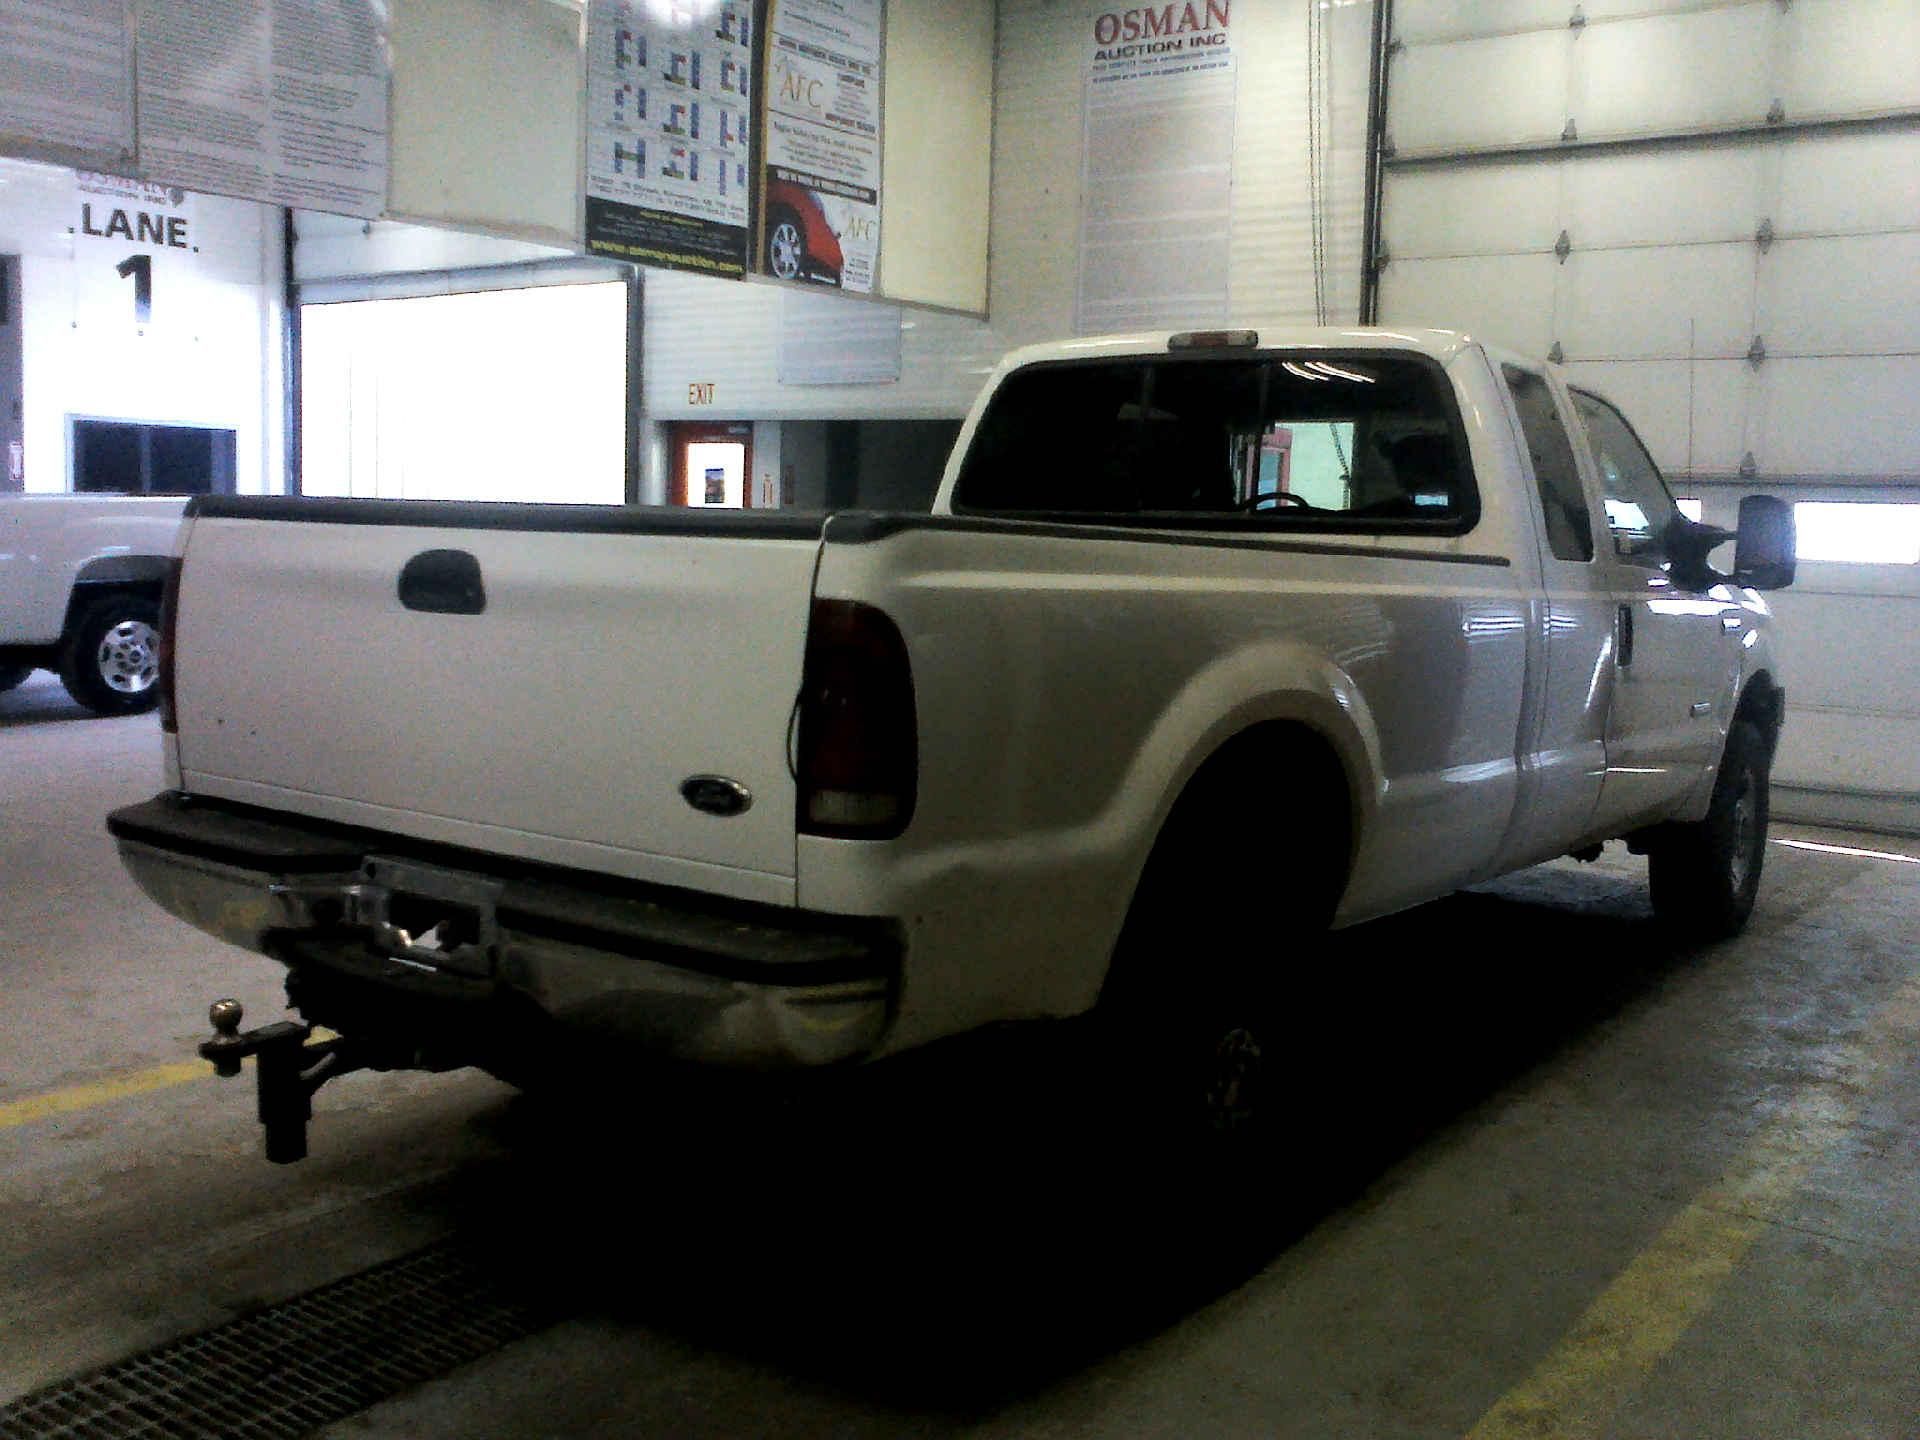 2006 FORD F-350 SD XLT SUPERCAB 4WD 6.0L V8 OHV 32V TURBO DIESEL AUTOMATIC SN:1FTWX31P96ED16141 - Image 4 of 9